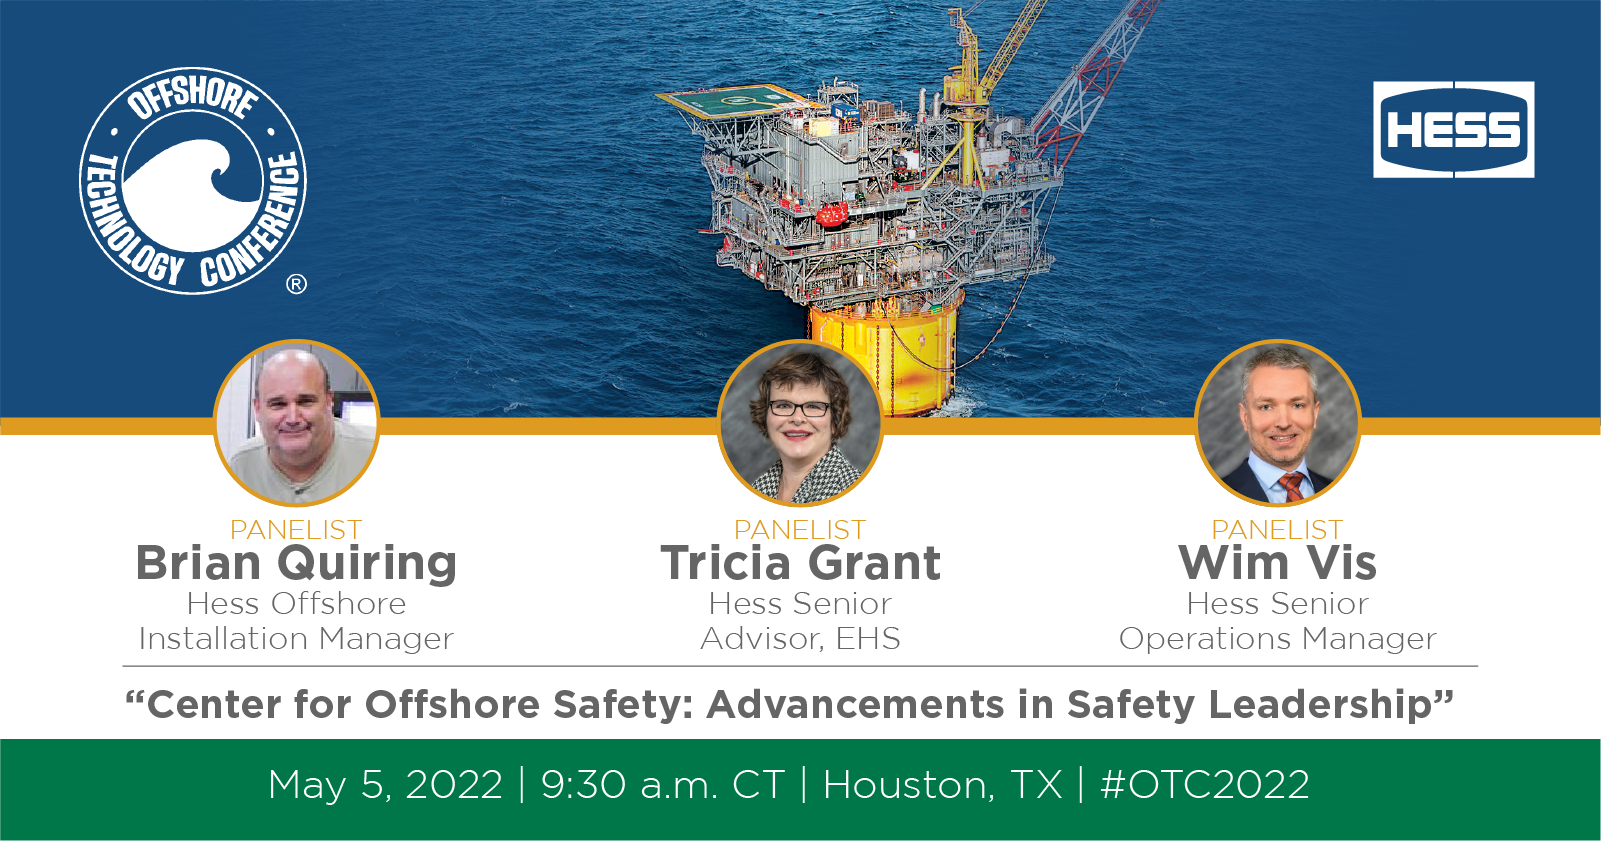 Hess Offshore Team Panelists at Offshore Technology Conference